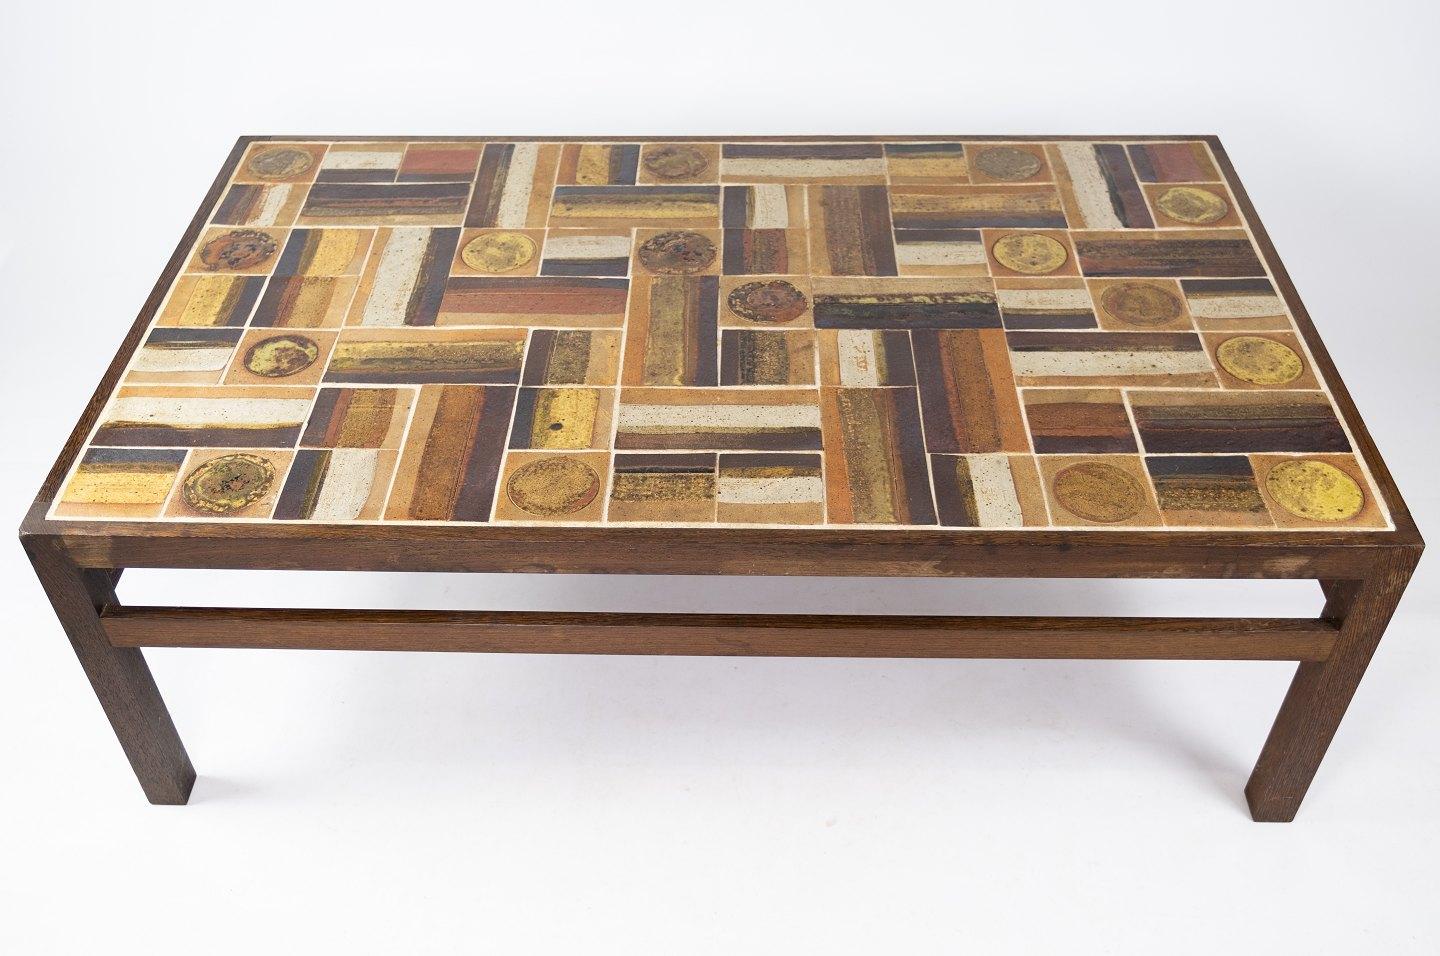 Scandinavian Modern Coffee Table in Rosewood and Dark Tiles, Designed by Tue Poulsen from the 1970s